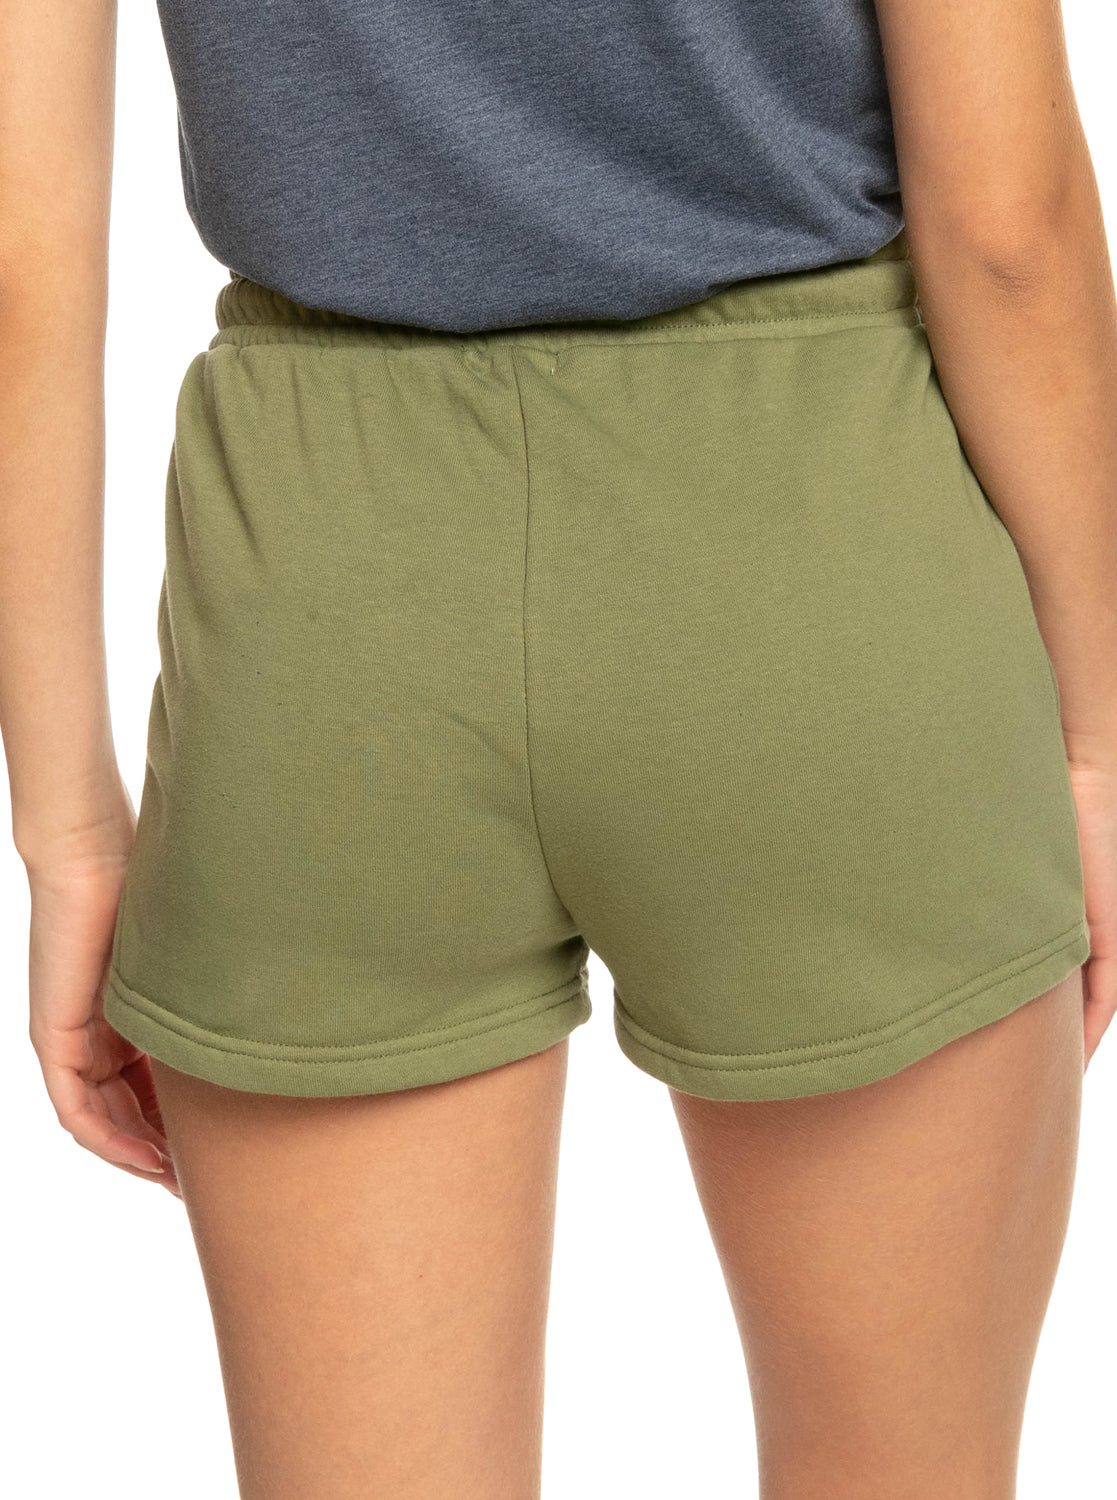 Roxy Surf Stoked Sweat Shorts | Roxy | Portwest - The Outdoor Shop